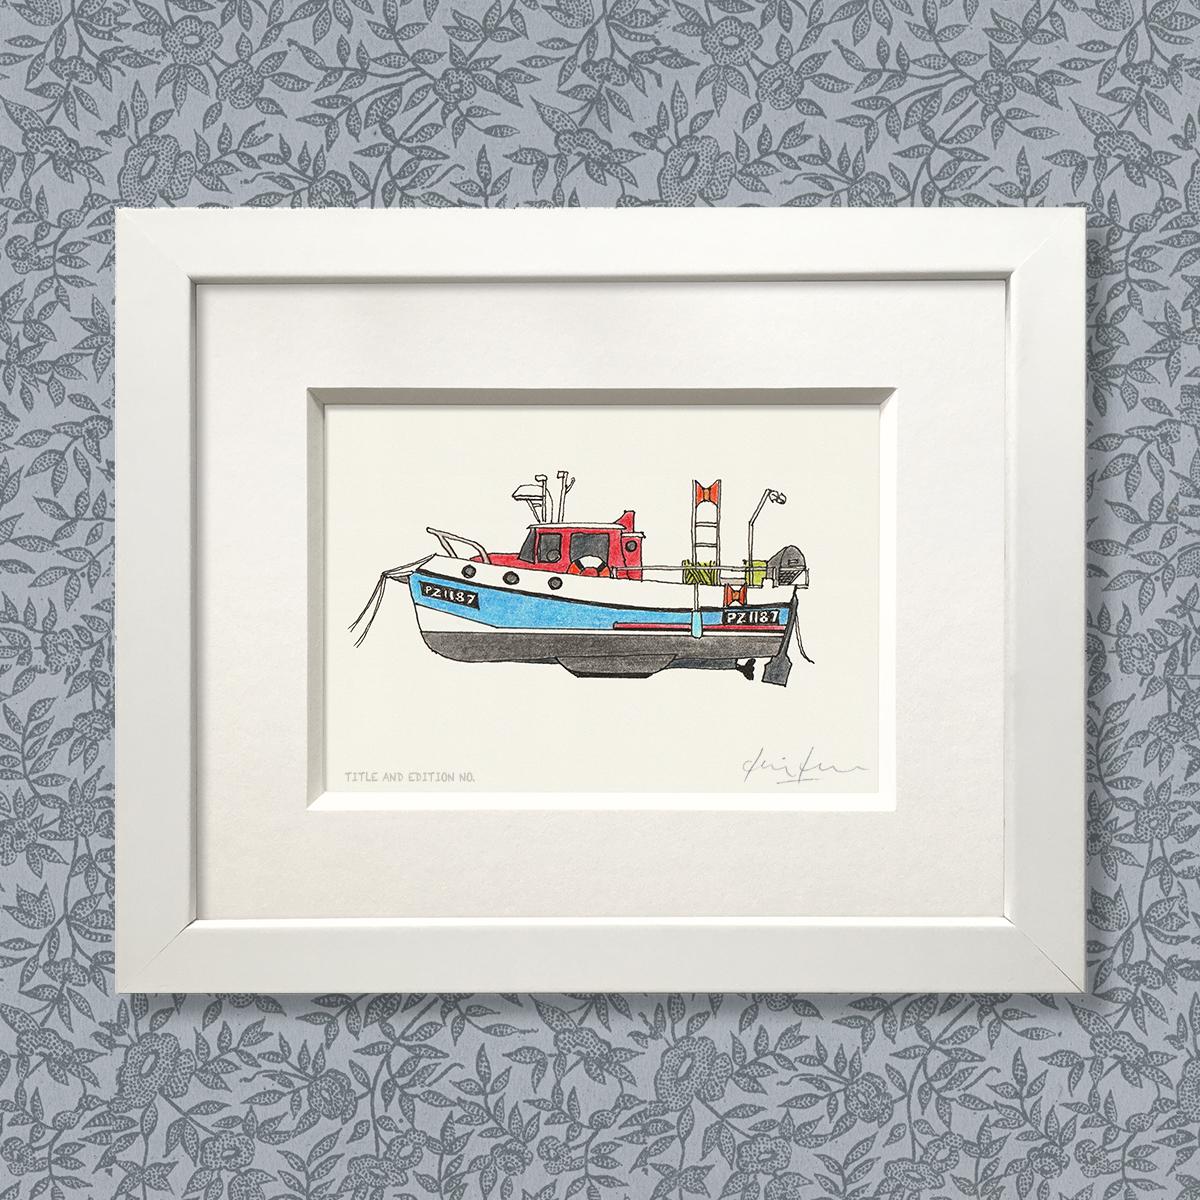 Limited edition print from pen and ink drawing of a fishing boat in a white frame